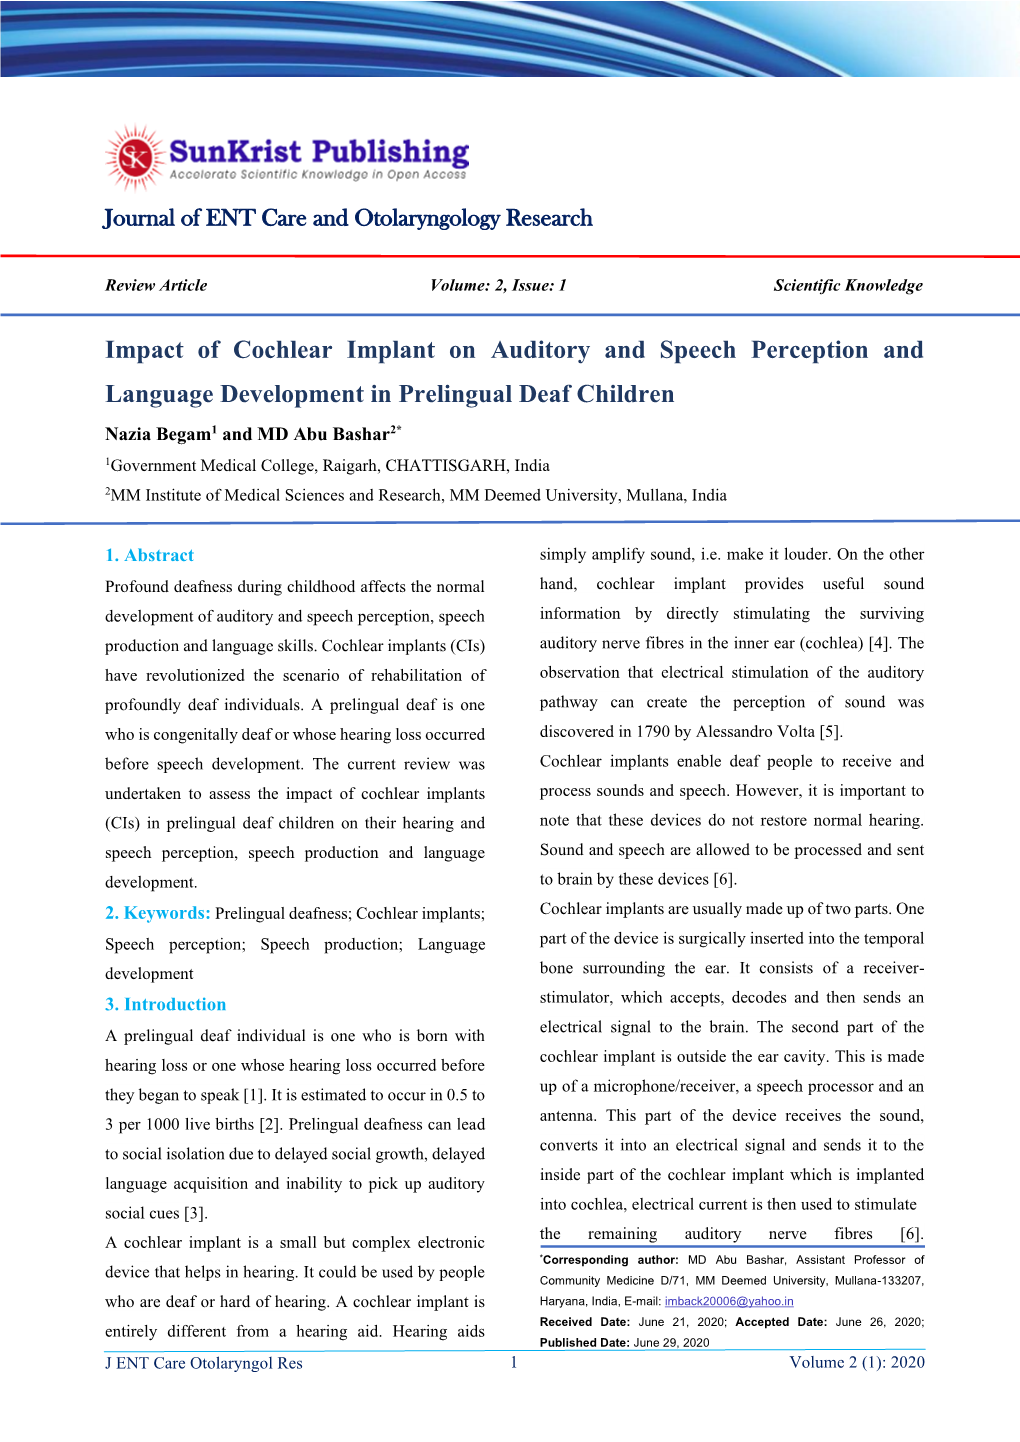 Impact of Cochlear Implant on Auditory and Speech Perception and Language Development in Prelingual Deaf Children